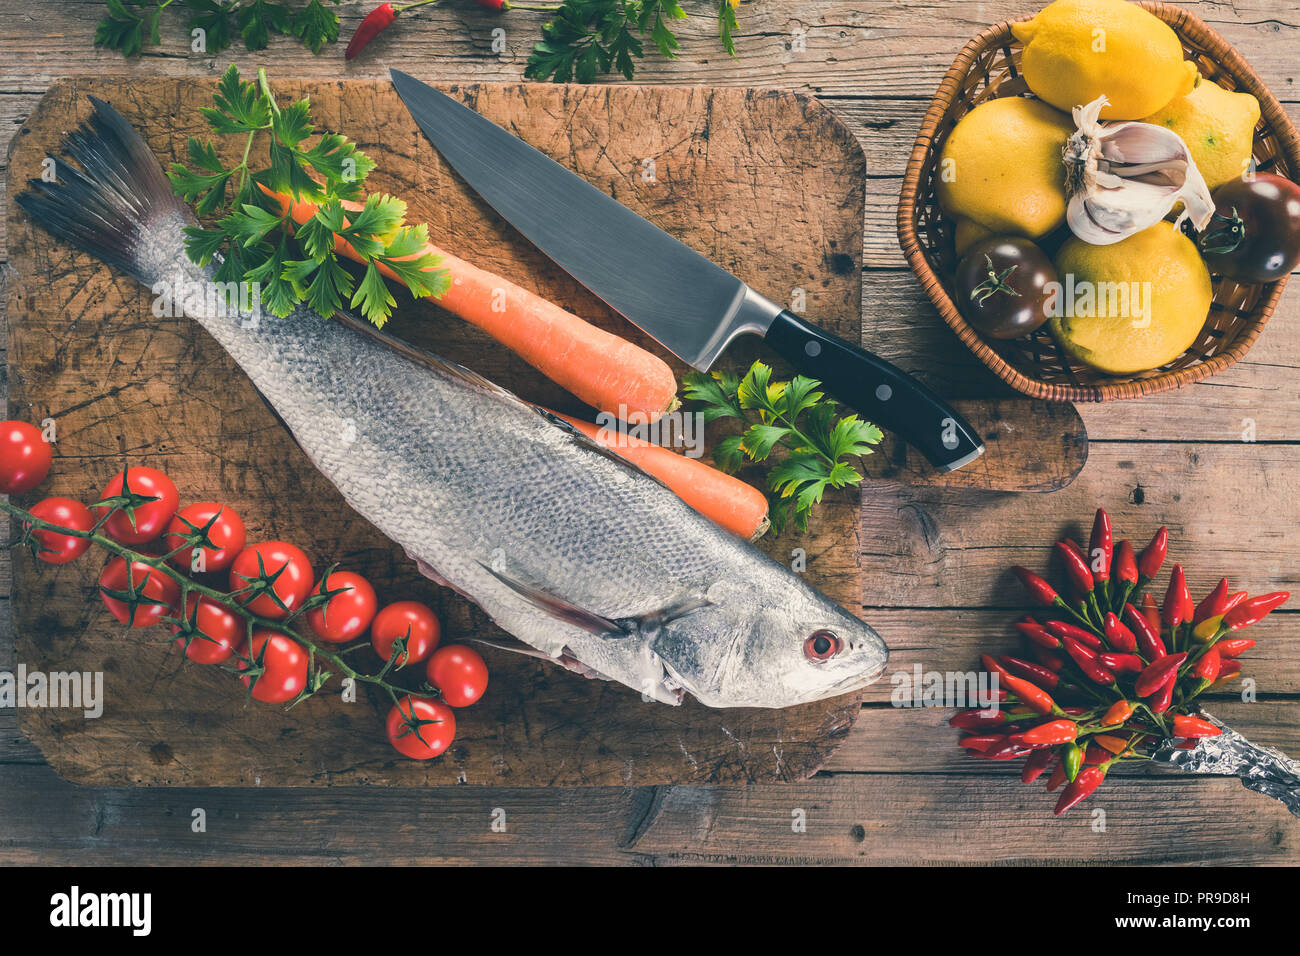 Shi drum fish (Umbrina cirrosa) on old wooden board with carrot, cherry tomatoes, black tomatoes, lemon, garlic, parsley and chili peppers, top view s Stock Photo